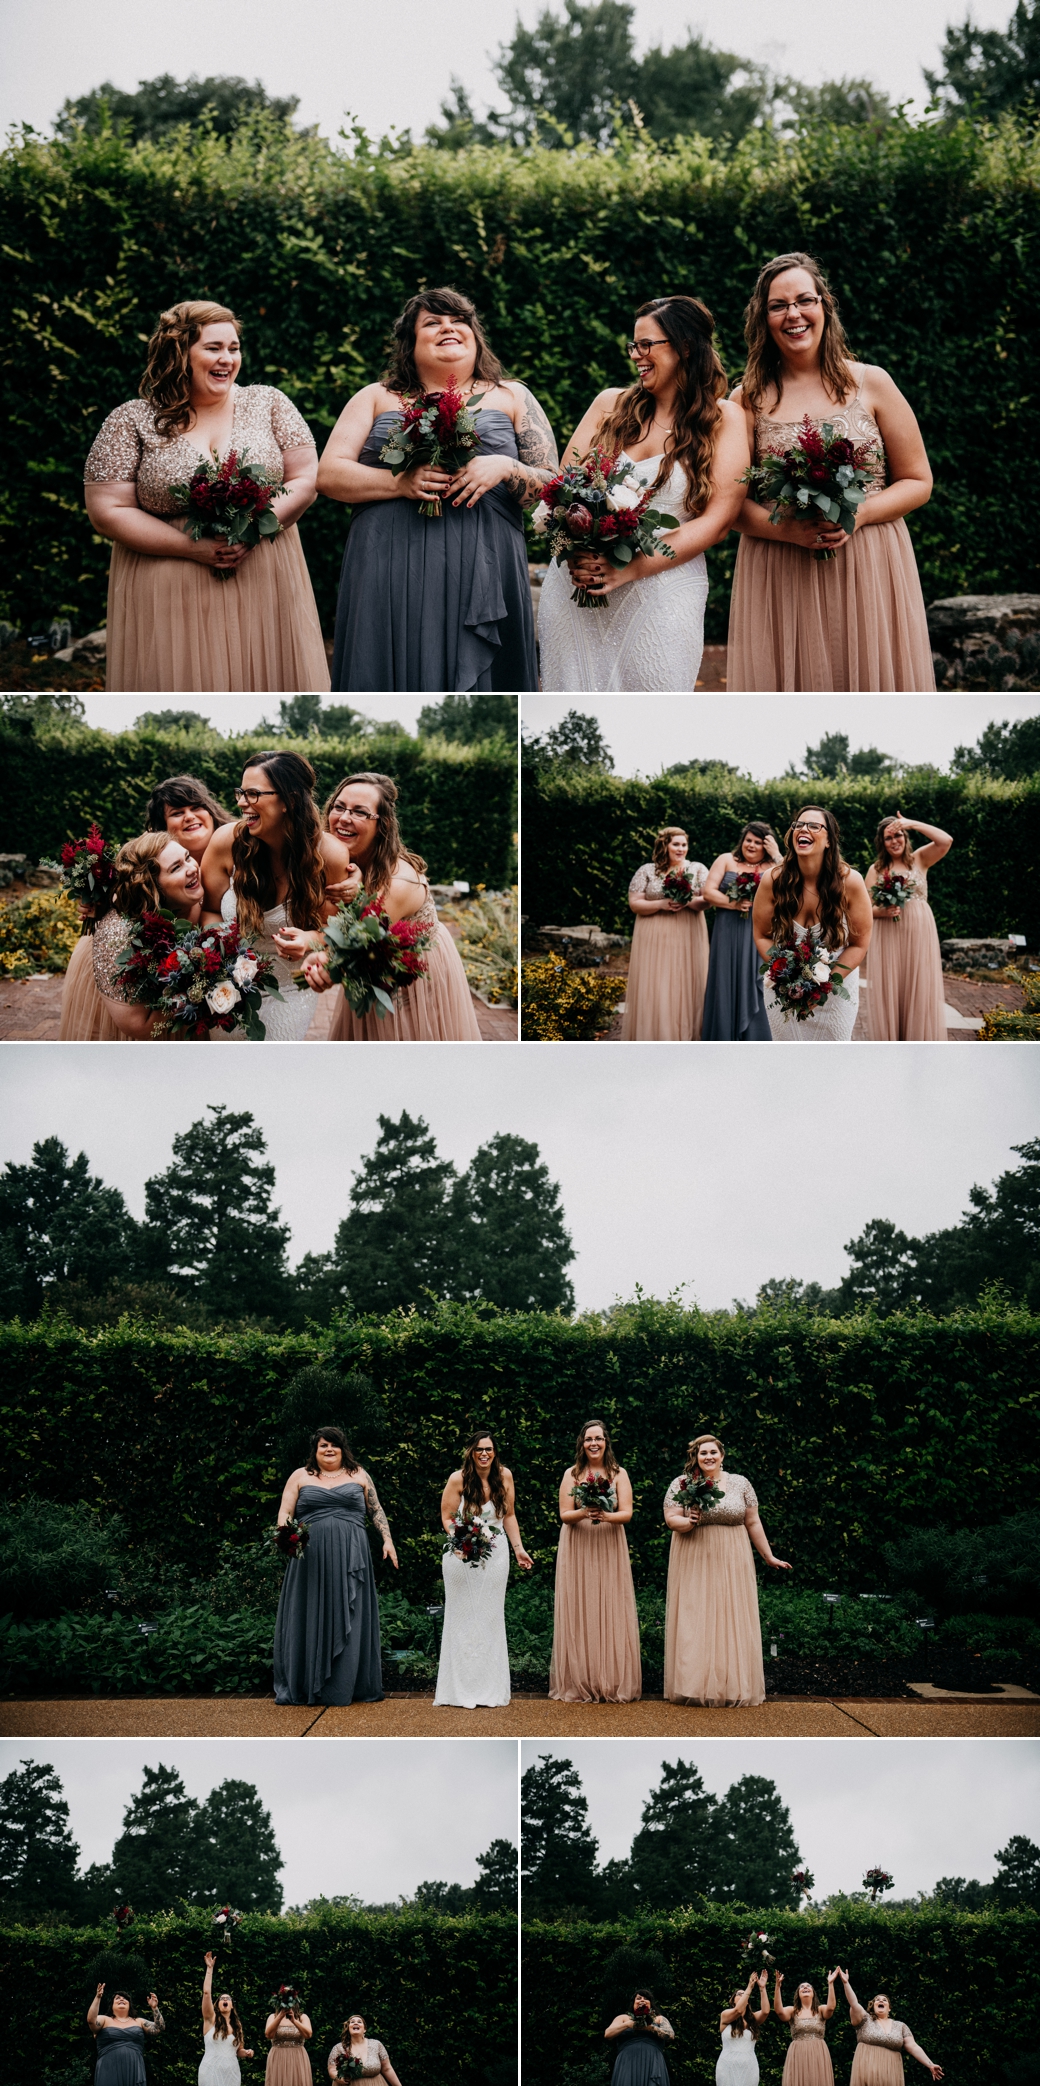 Collage of candid wedding party photos on a rainy wedding day in St. Louis